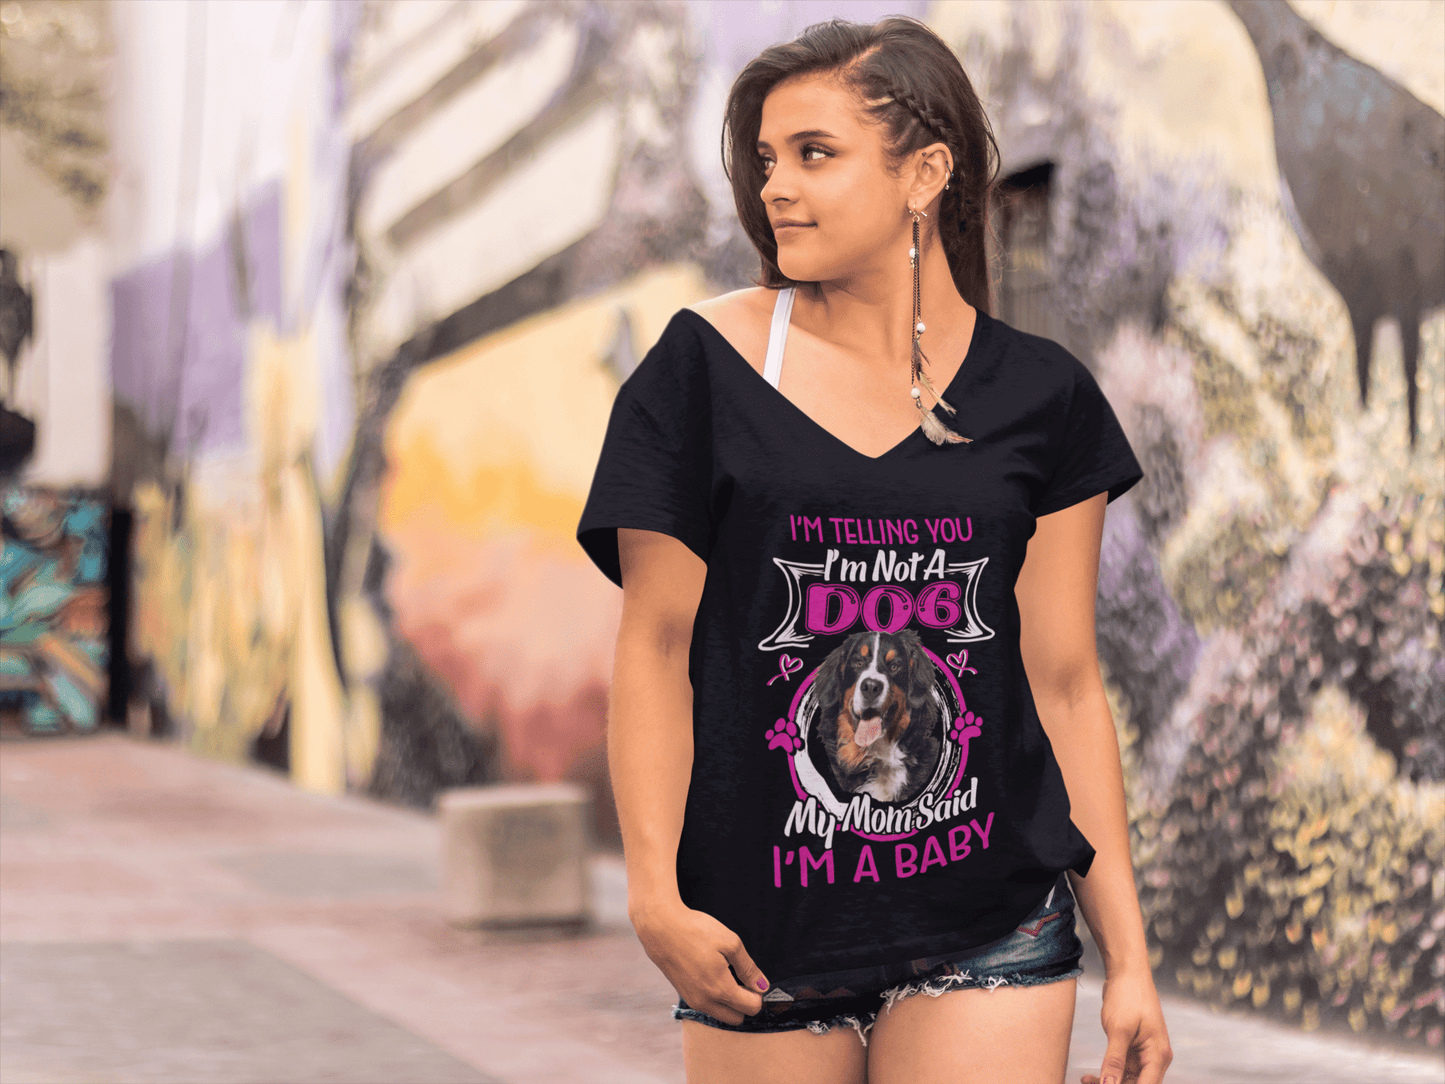 ULTRABASIC Women's T-Shirt I'm Telling You I'm Not a Bernese Mountain - My Mom Said I'm a Baby - Cute Puppy Dog Lover Tee Shirt